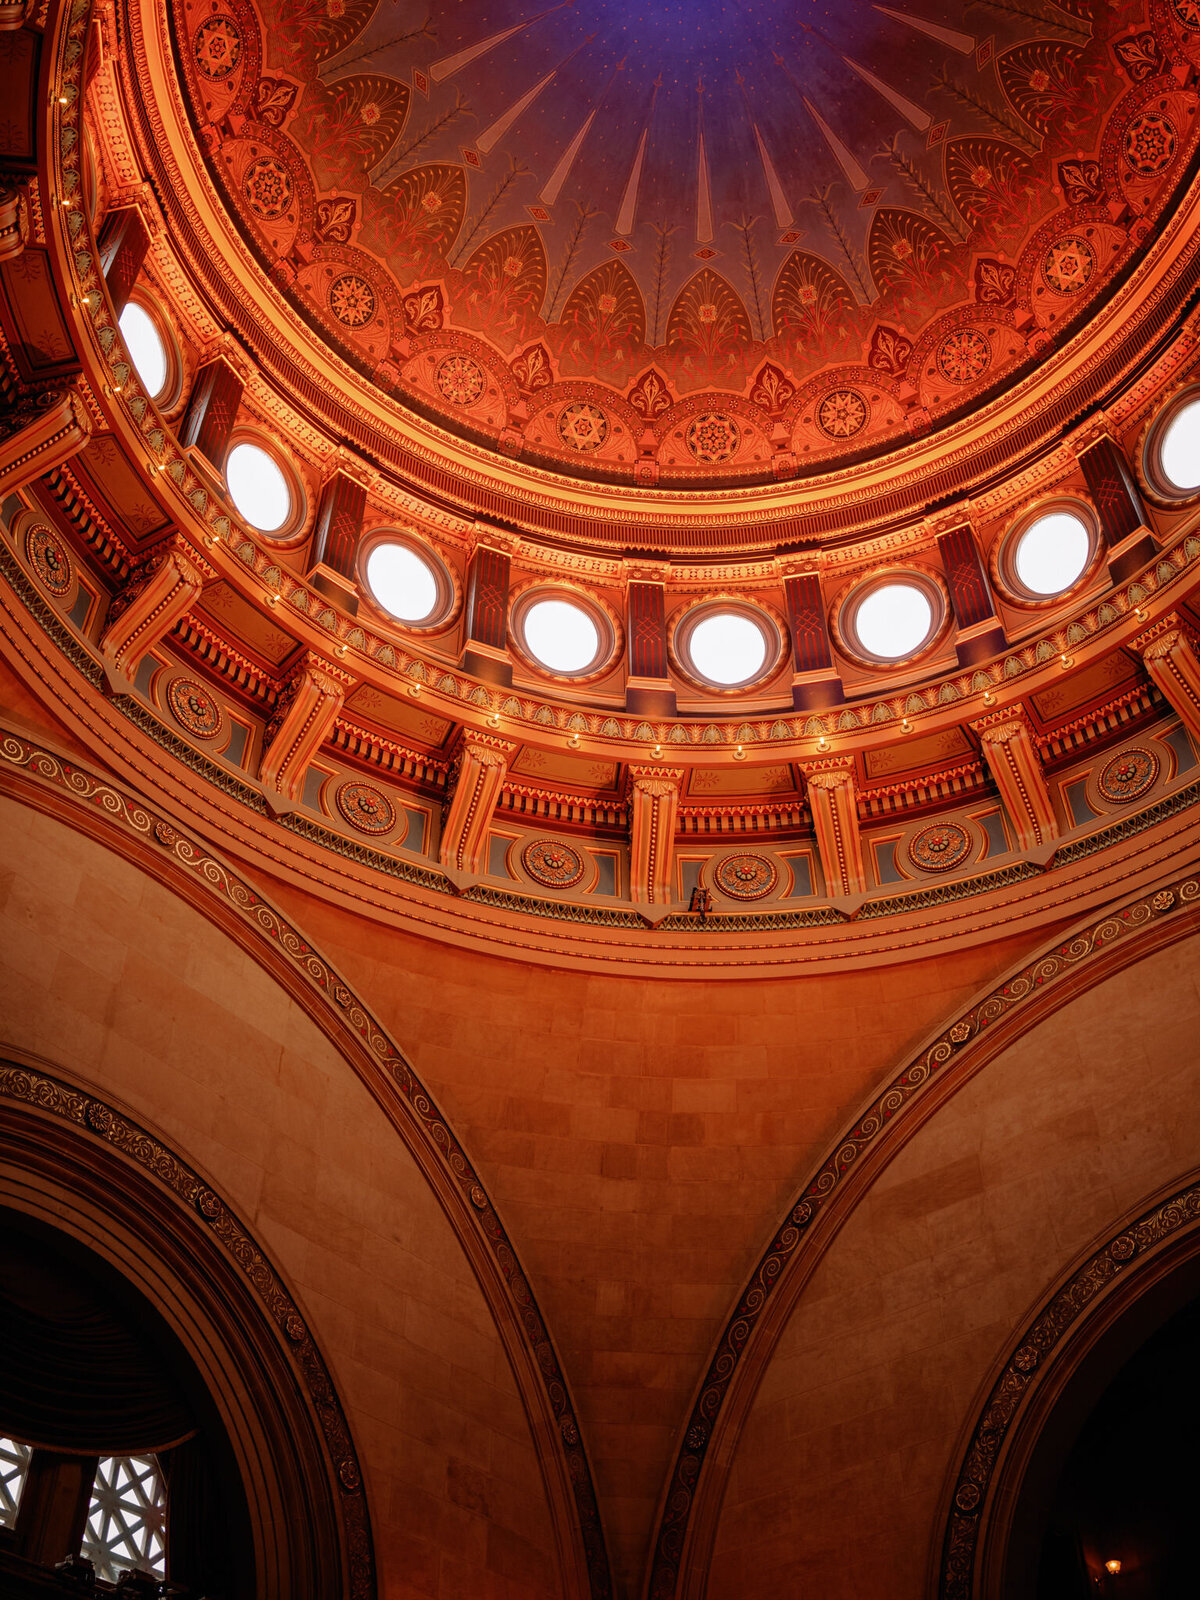 dome at weylin historic brooklyn wedding venue for large guest count